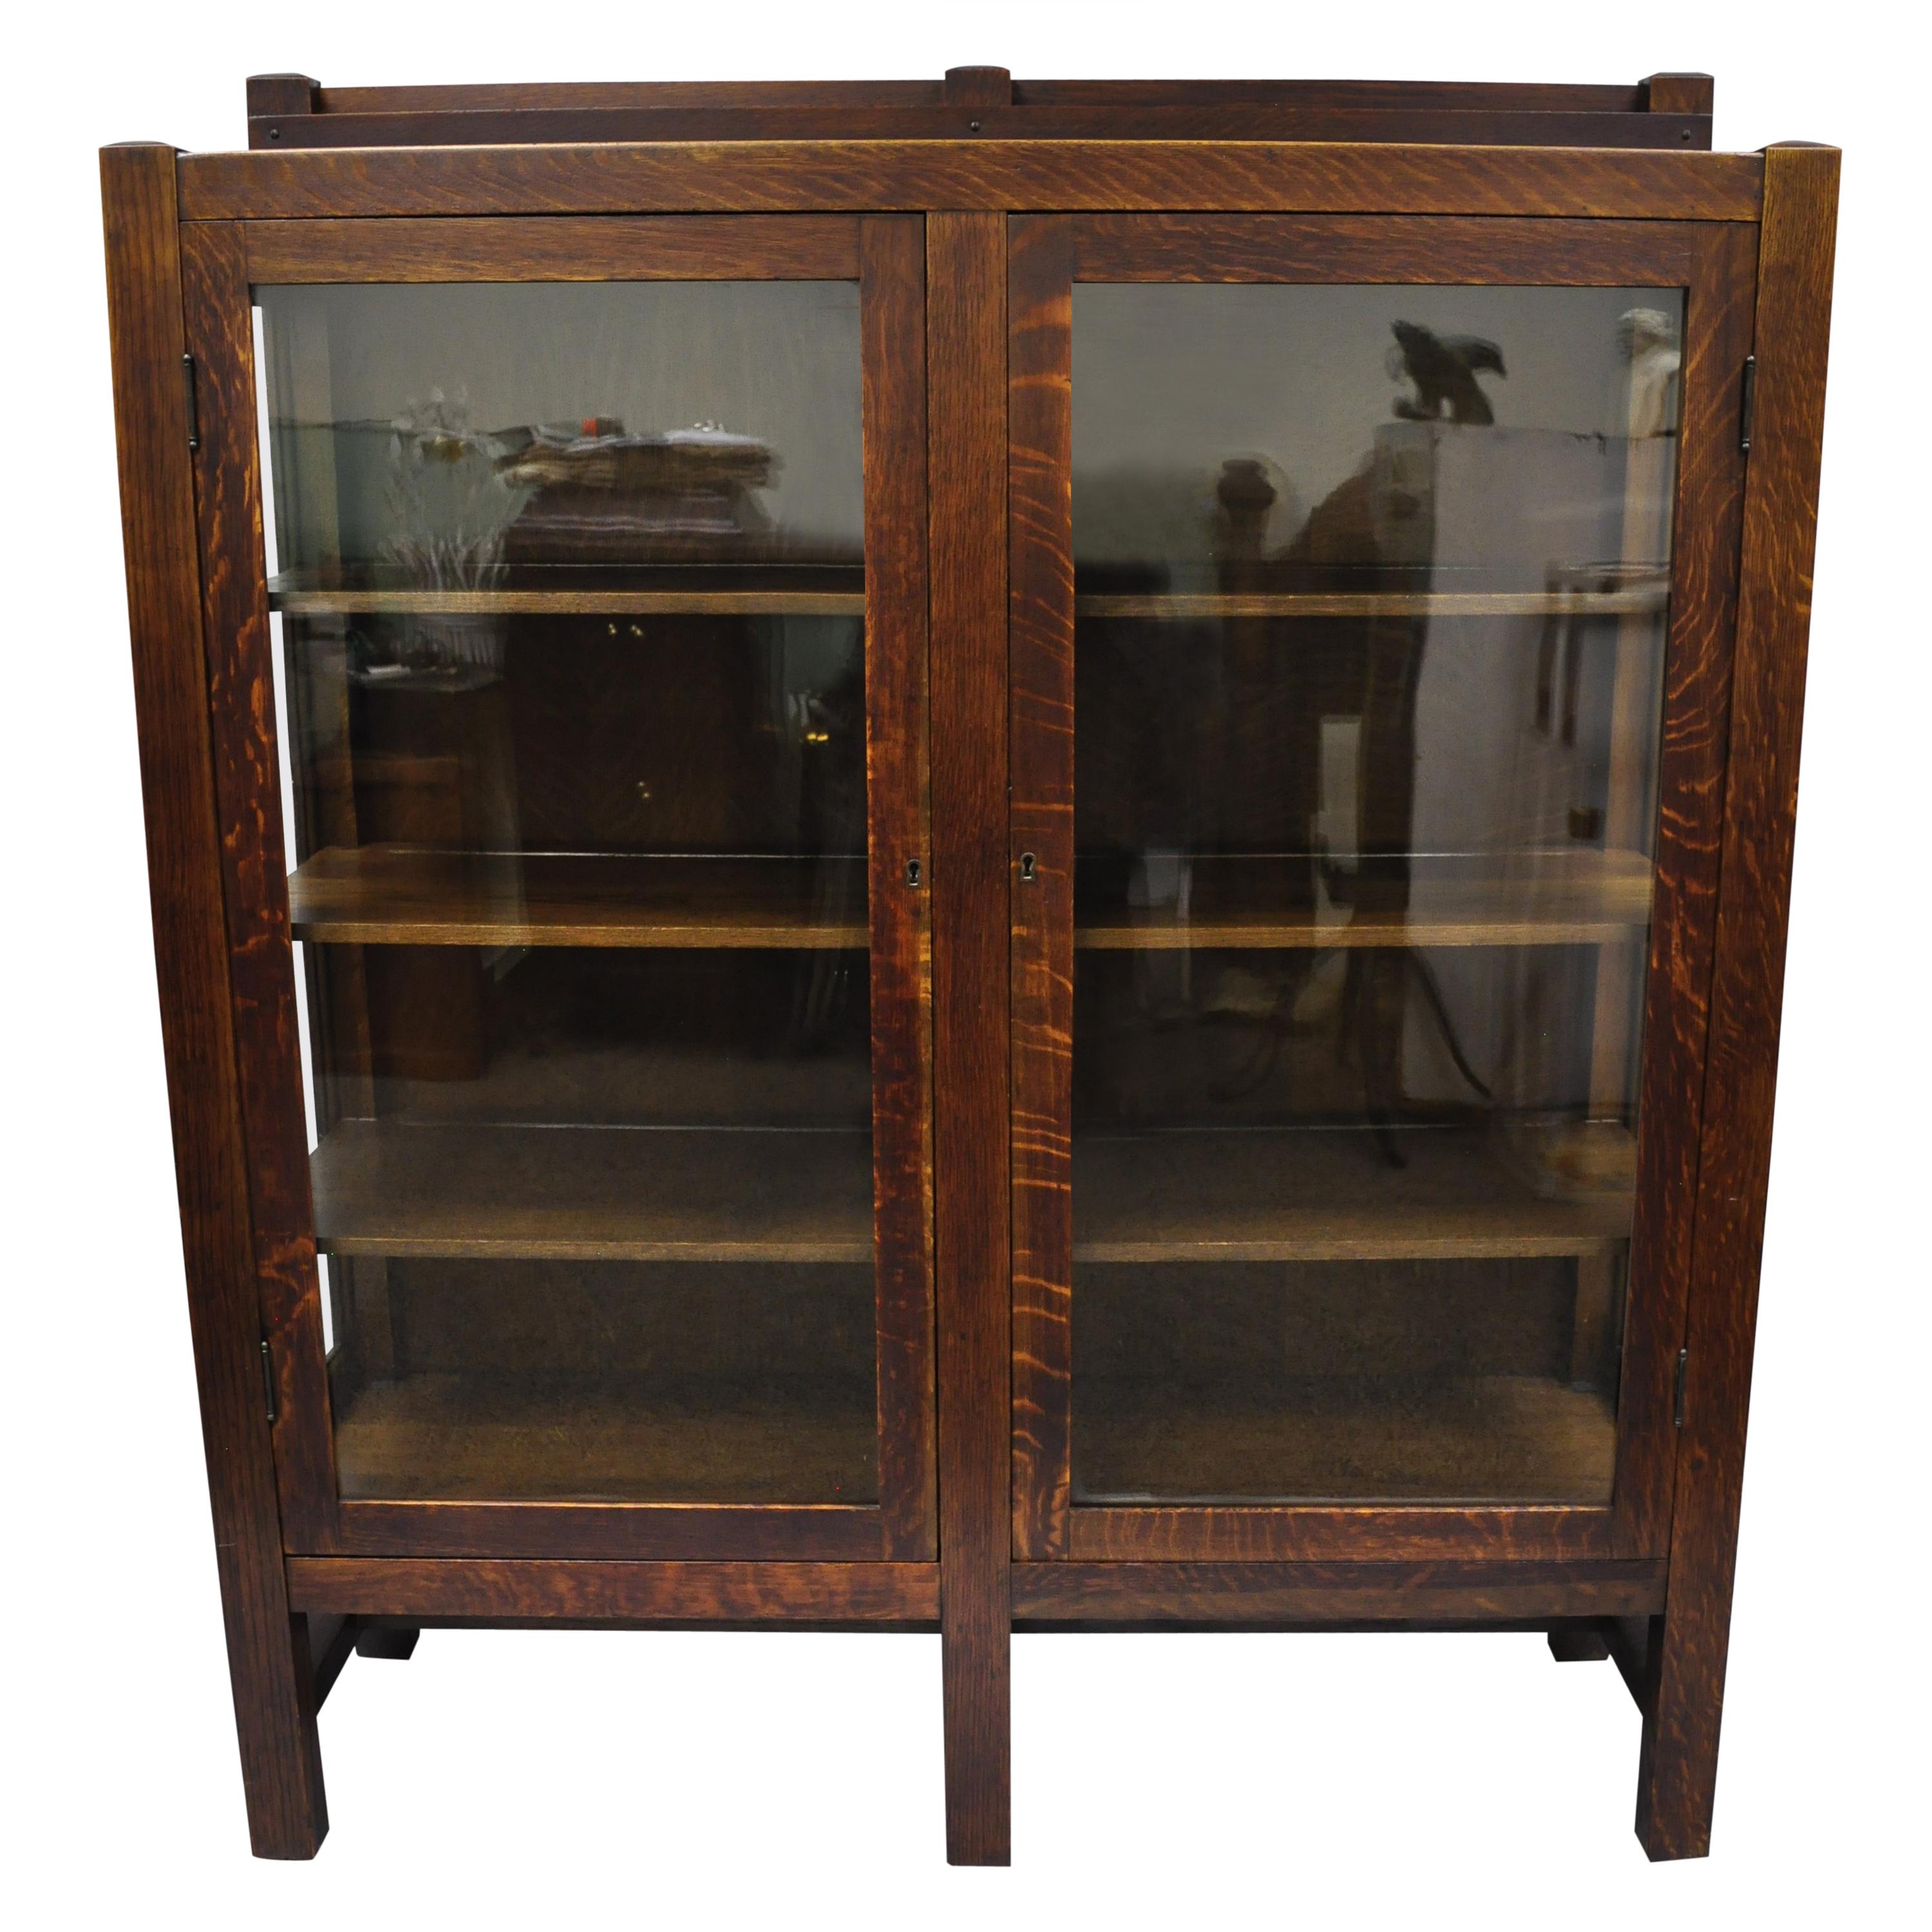 Mission Arts & Crafts Stickley Era Glass Double Door China Cabinet Bookcase